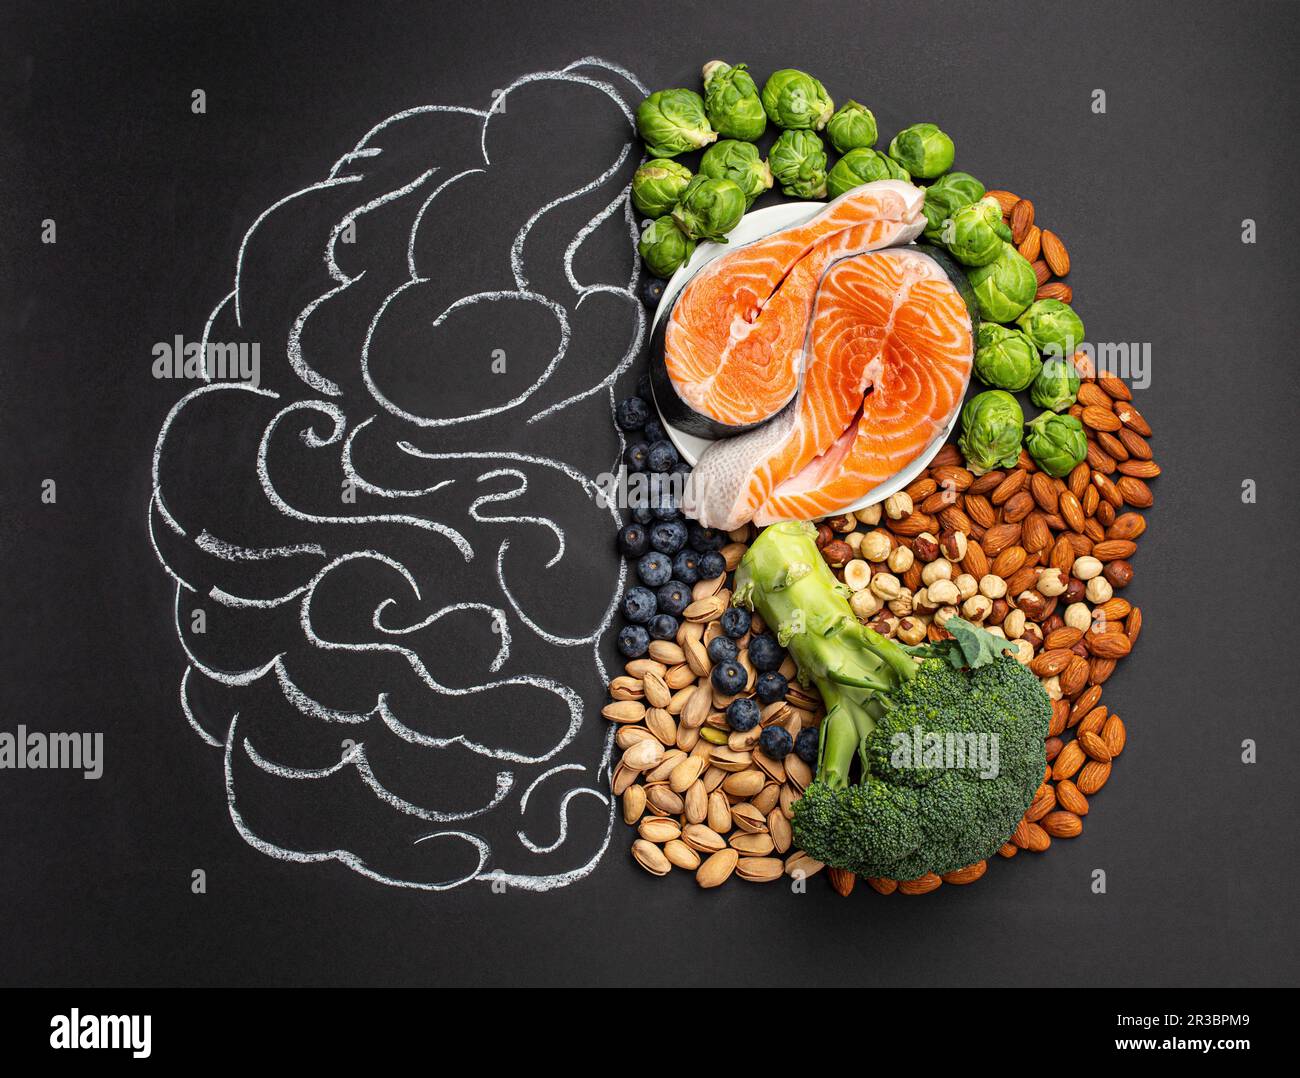 Chalk hand drawn brain with assorted food, food for brain health and good memory Stock Photo